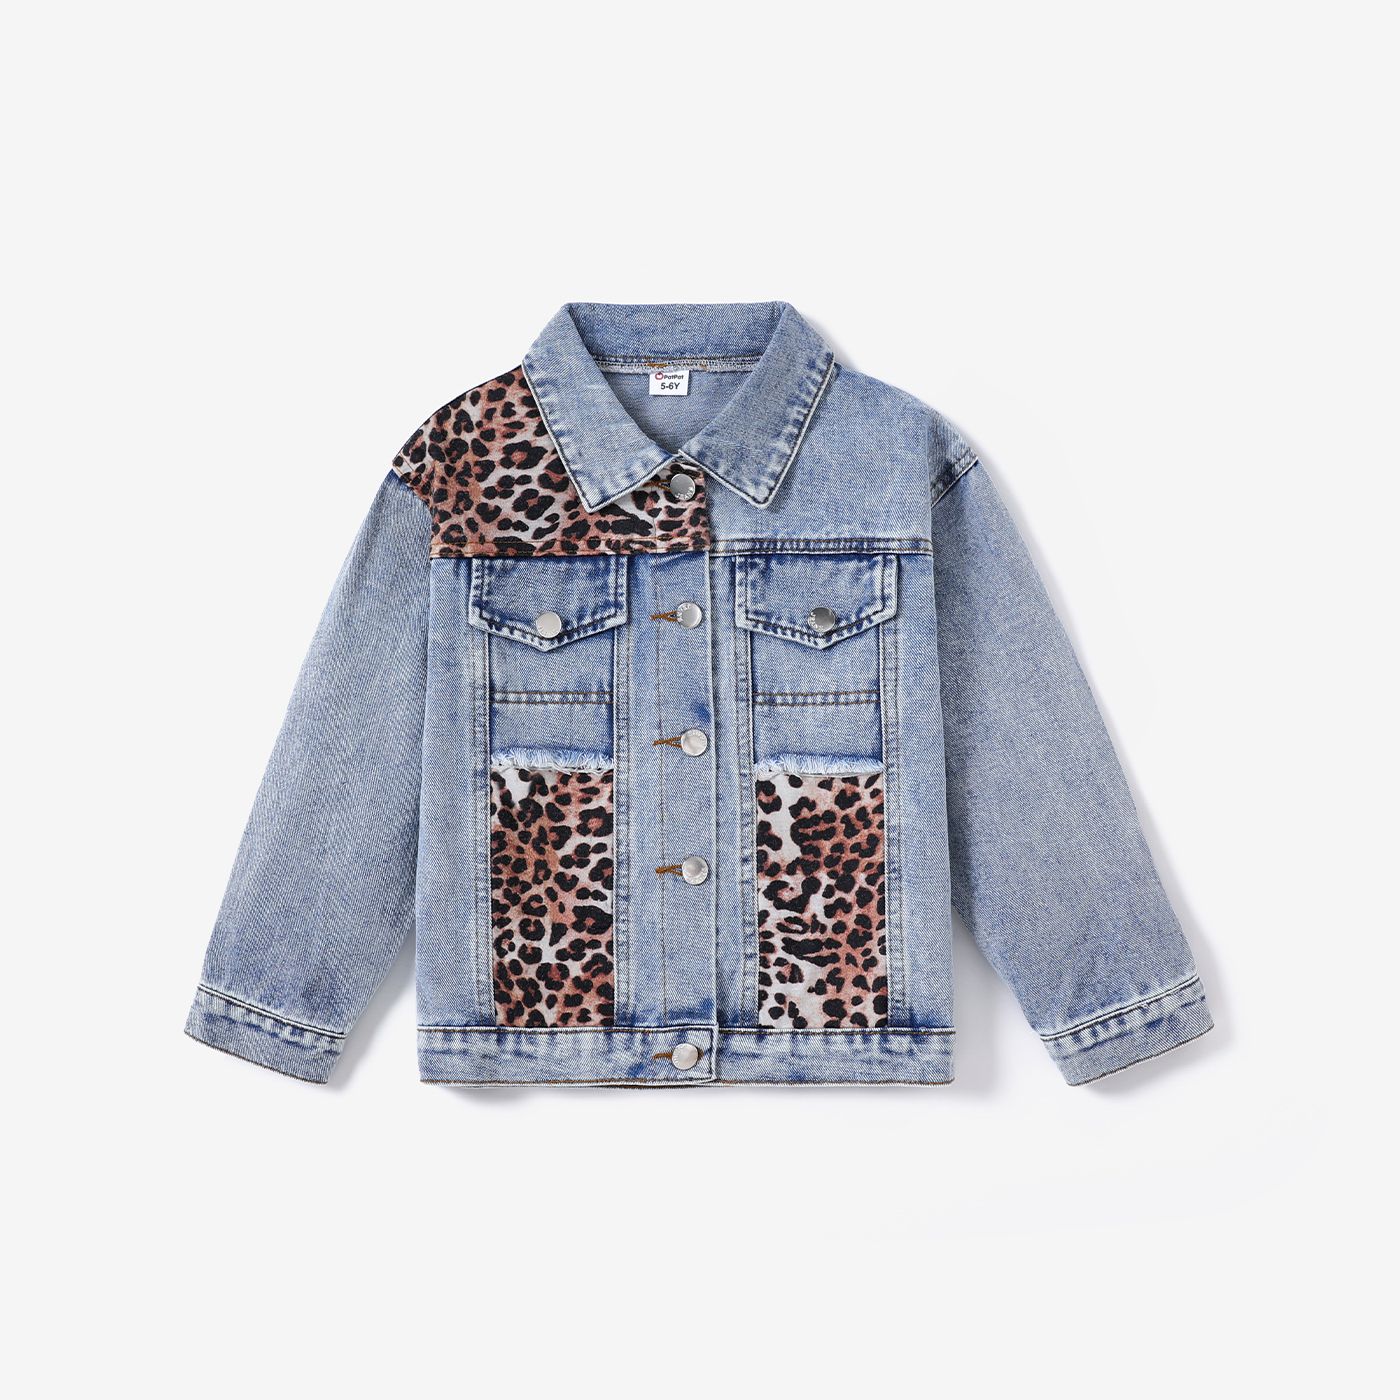 Watch How She Embellishes A Denim Jacket With Leopard Print Fabric  (Stunning!)